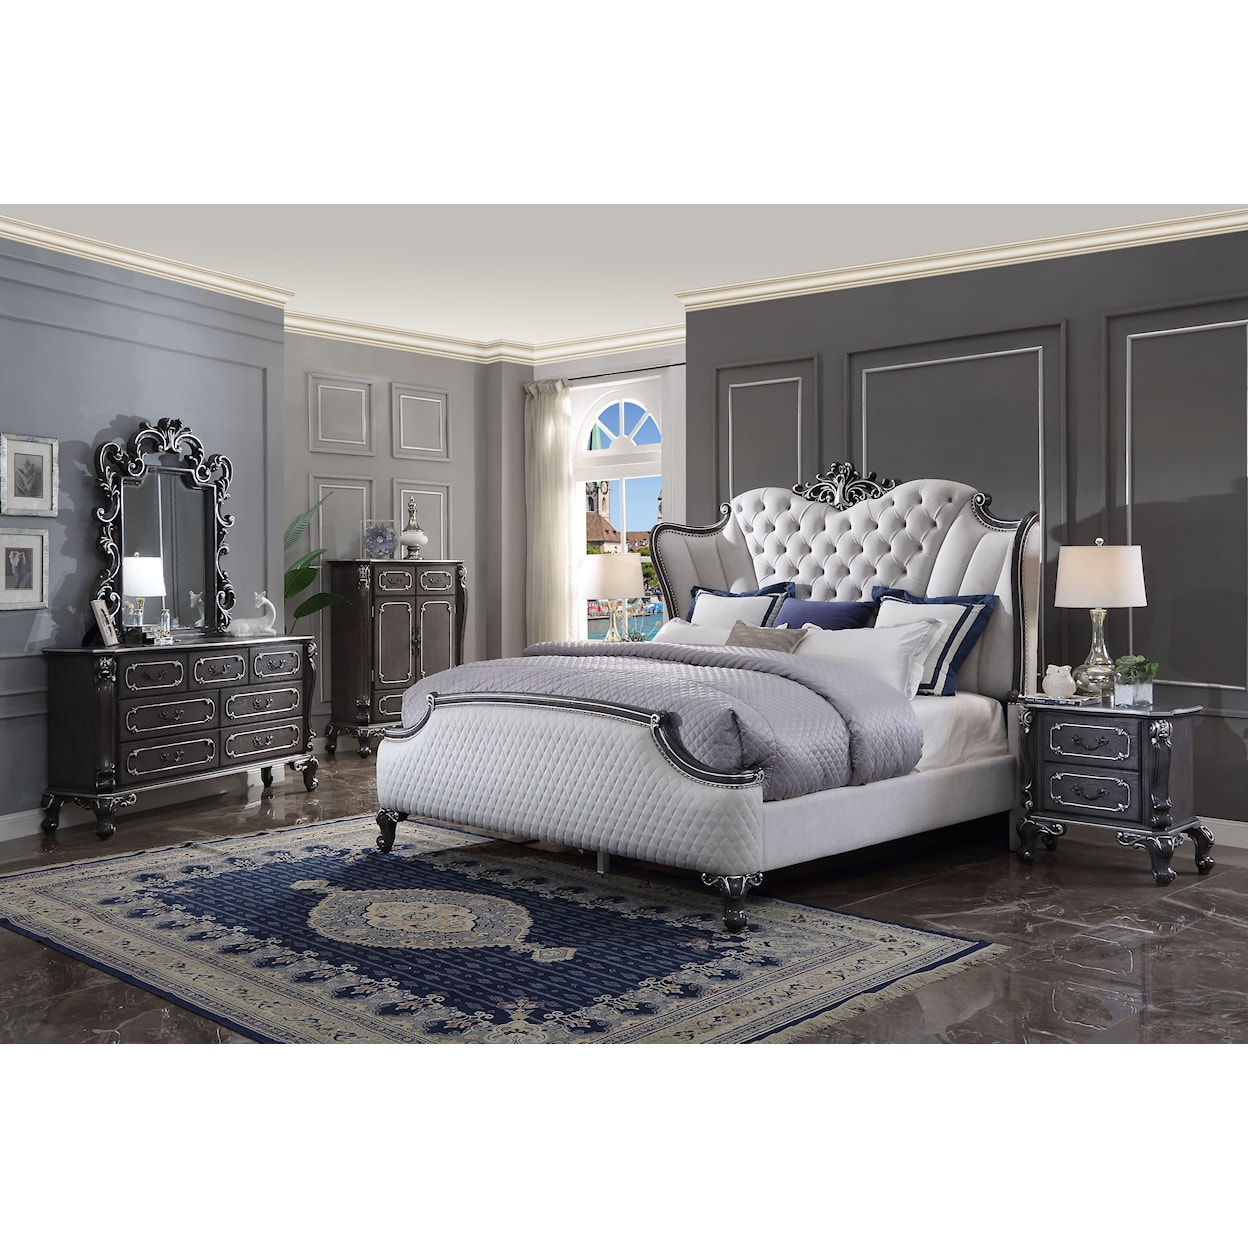 Acme Furniture House Delphine California King Bedroom Group